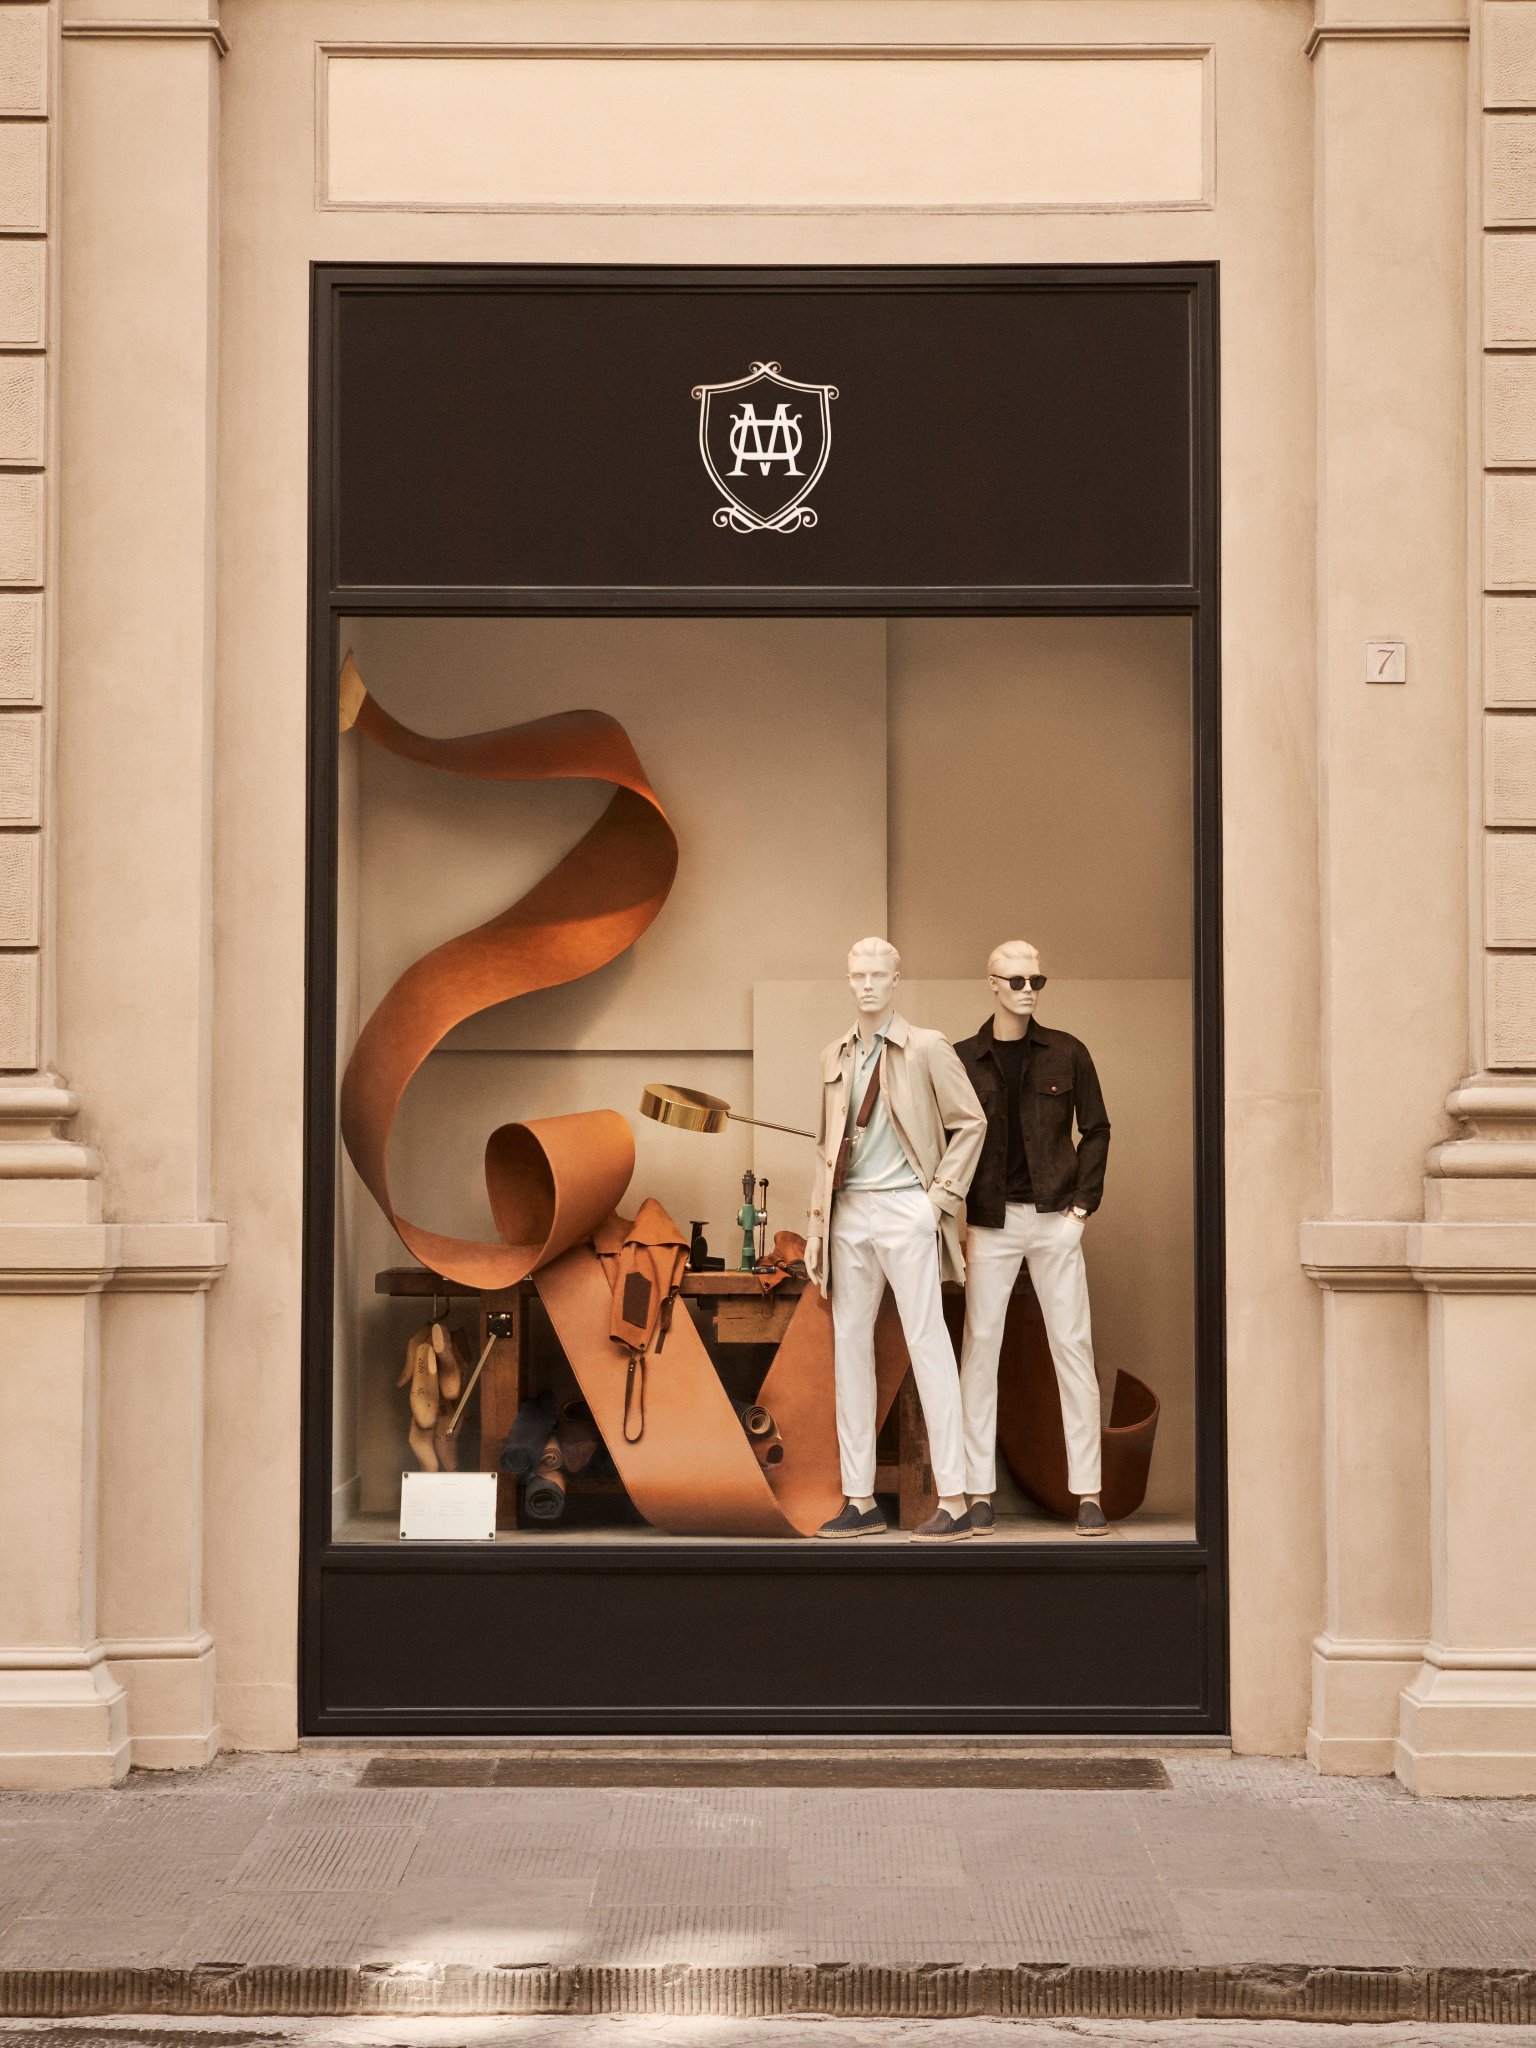 Refrescante diagonal Decano Massimo Dutti on Twitter: "Live from Florence! Massimo Dutti's flagship  store windows in Via Roma were crafted in a very special way coinciding  with Pitti Uomo Fair, the international menswear event. Find